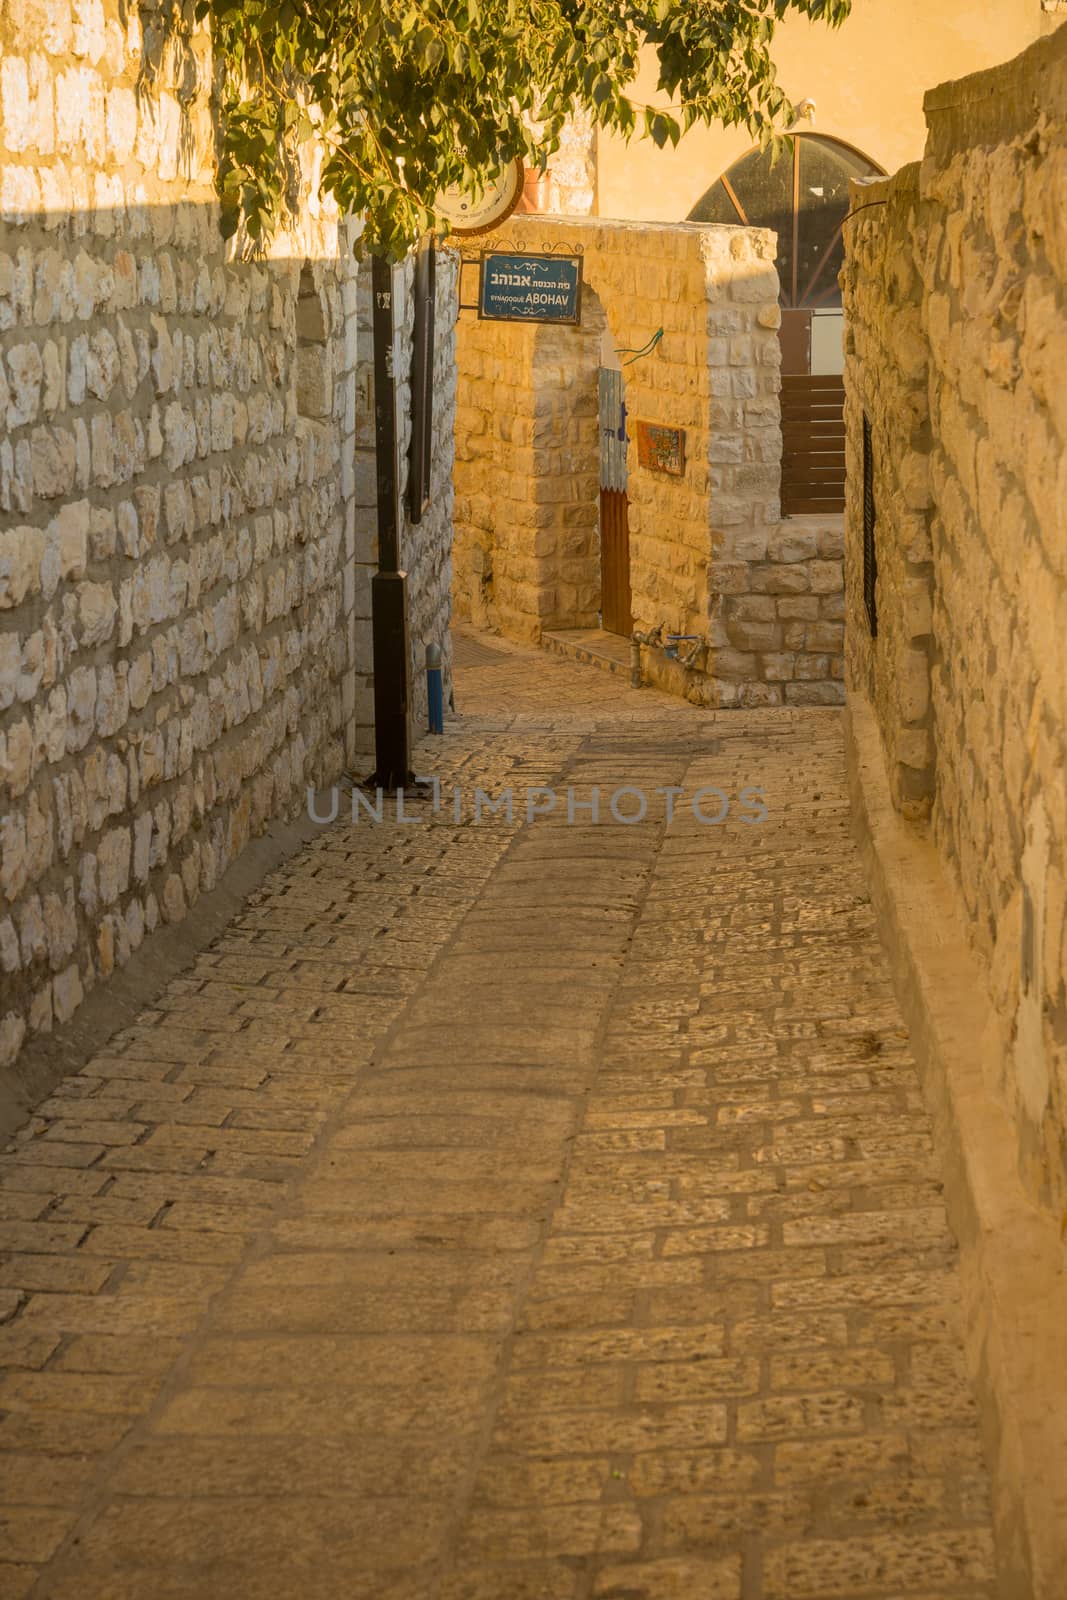 Alley with the Abuhav Synagogue sign, in Safed (Tzfat) by RnDmS